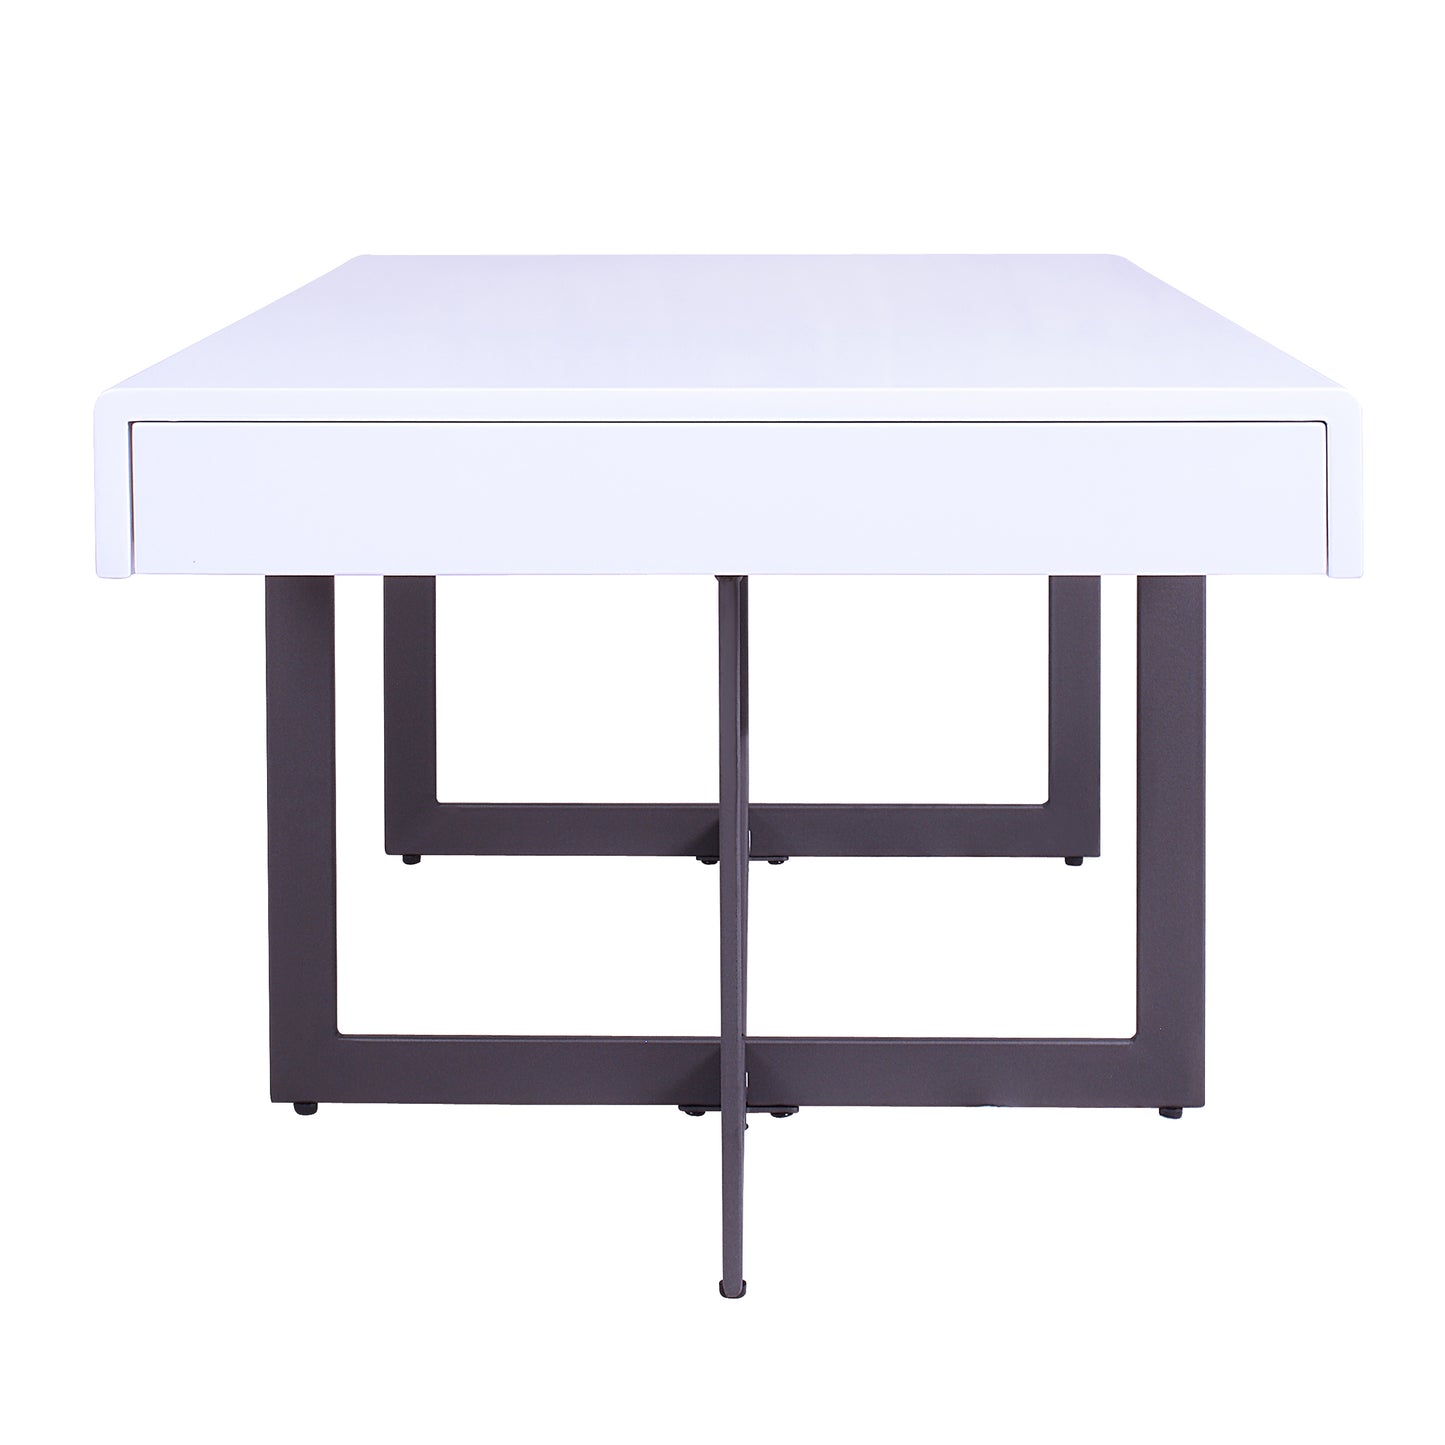 Front-facing coffee table only side view from a three-piece modern white high gloss and gunmetal storage coffee table set with hidden drawers on a white background